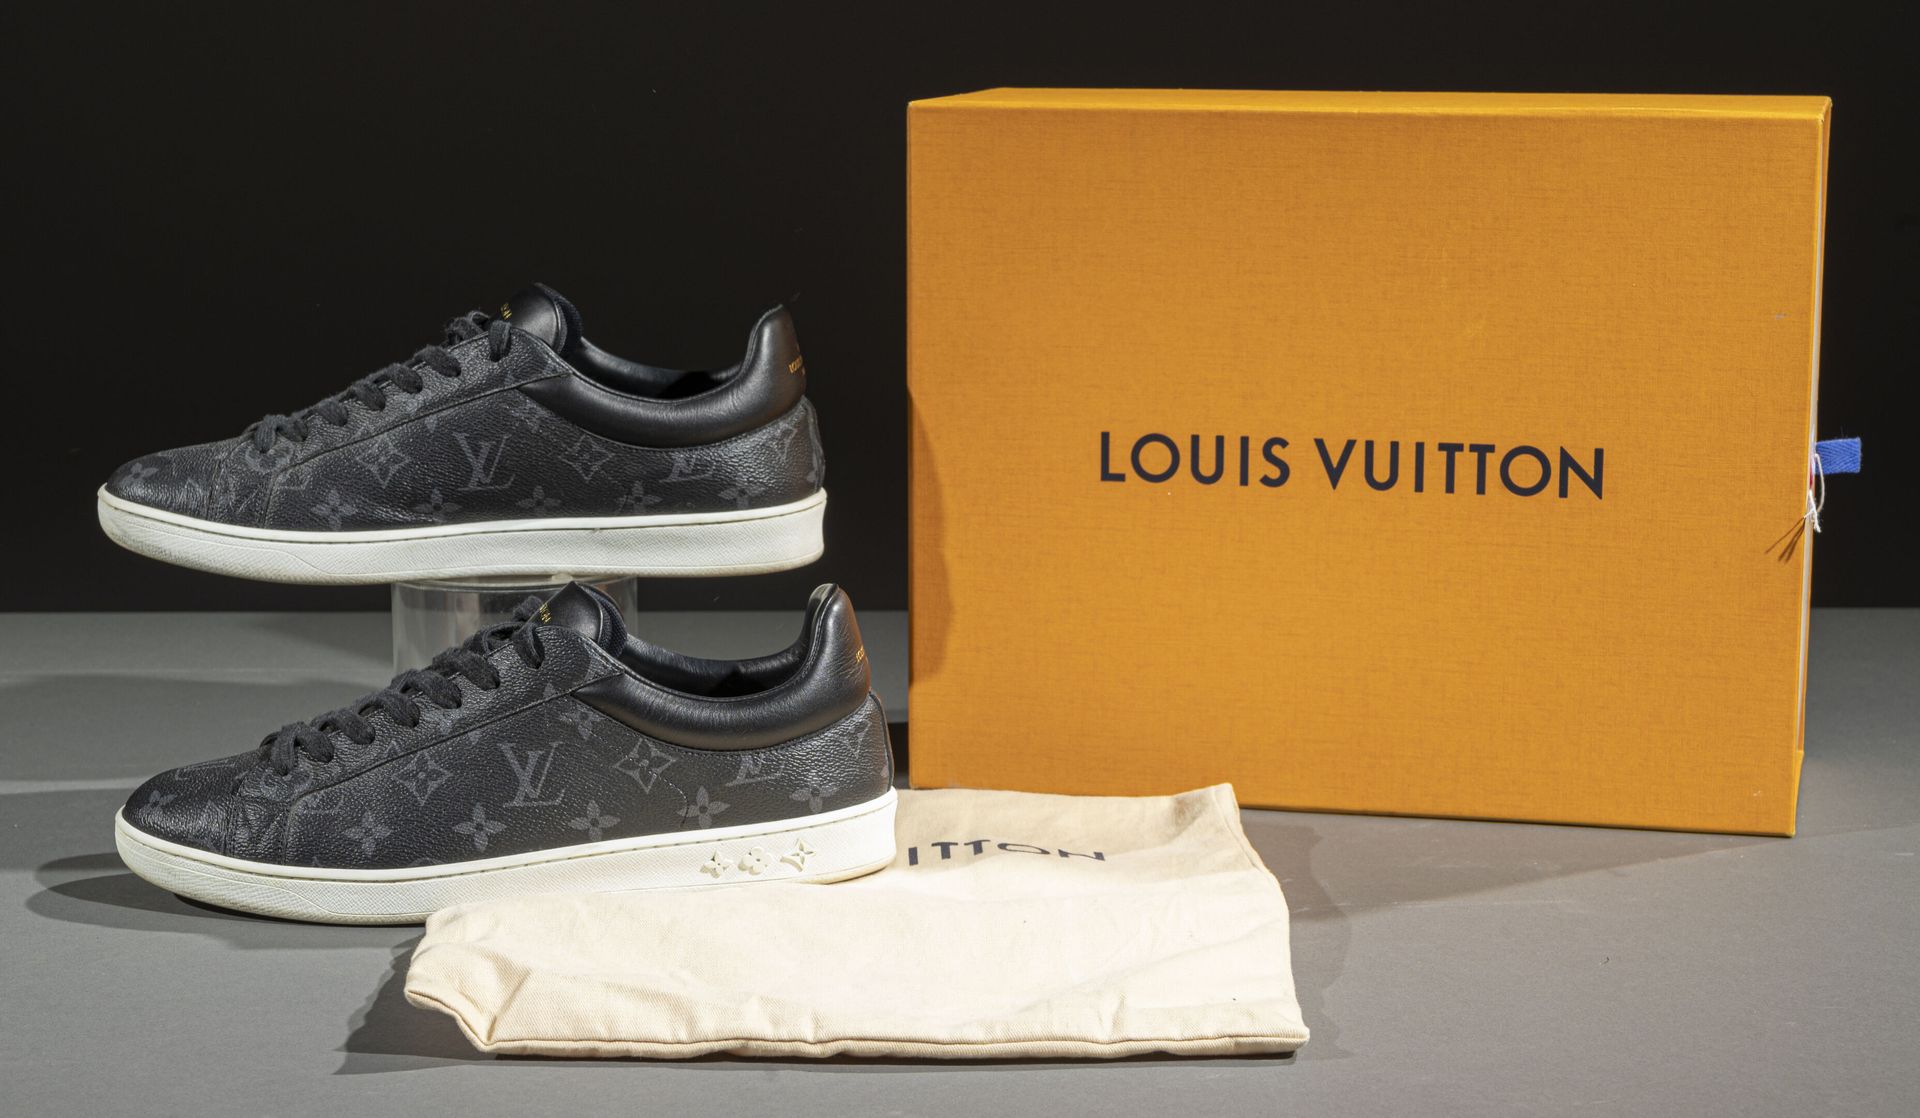 Louis VUITTON Pair of Luxembourg sneakers in Monogram gr…